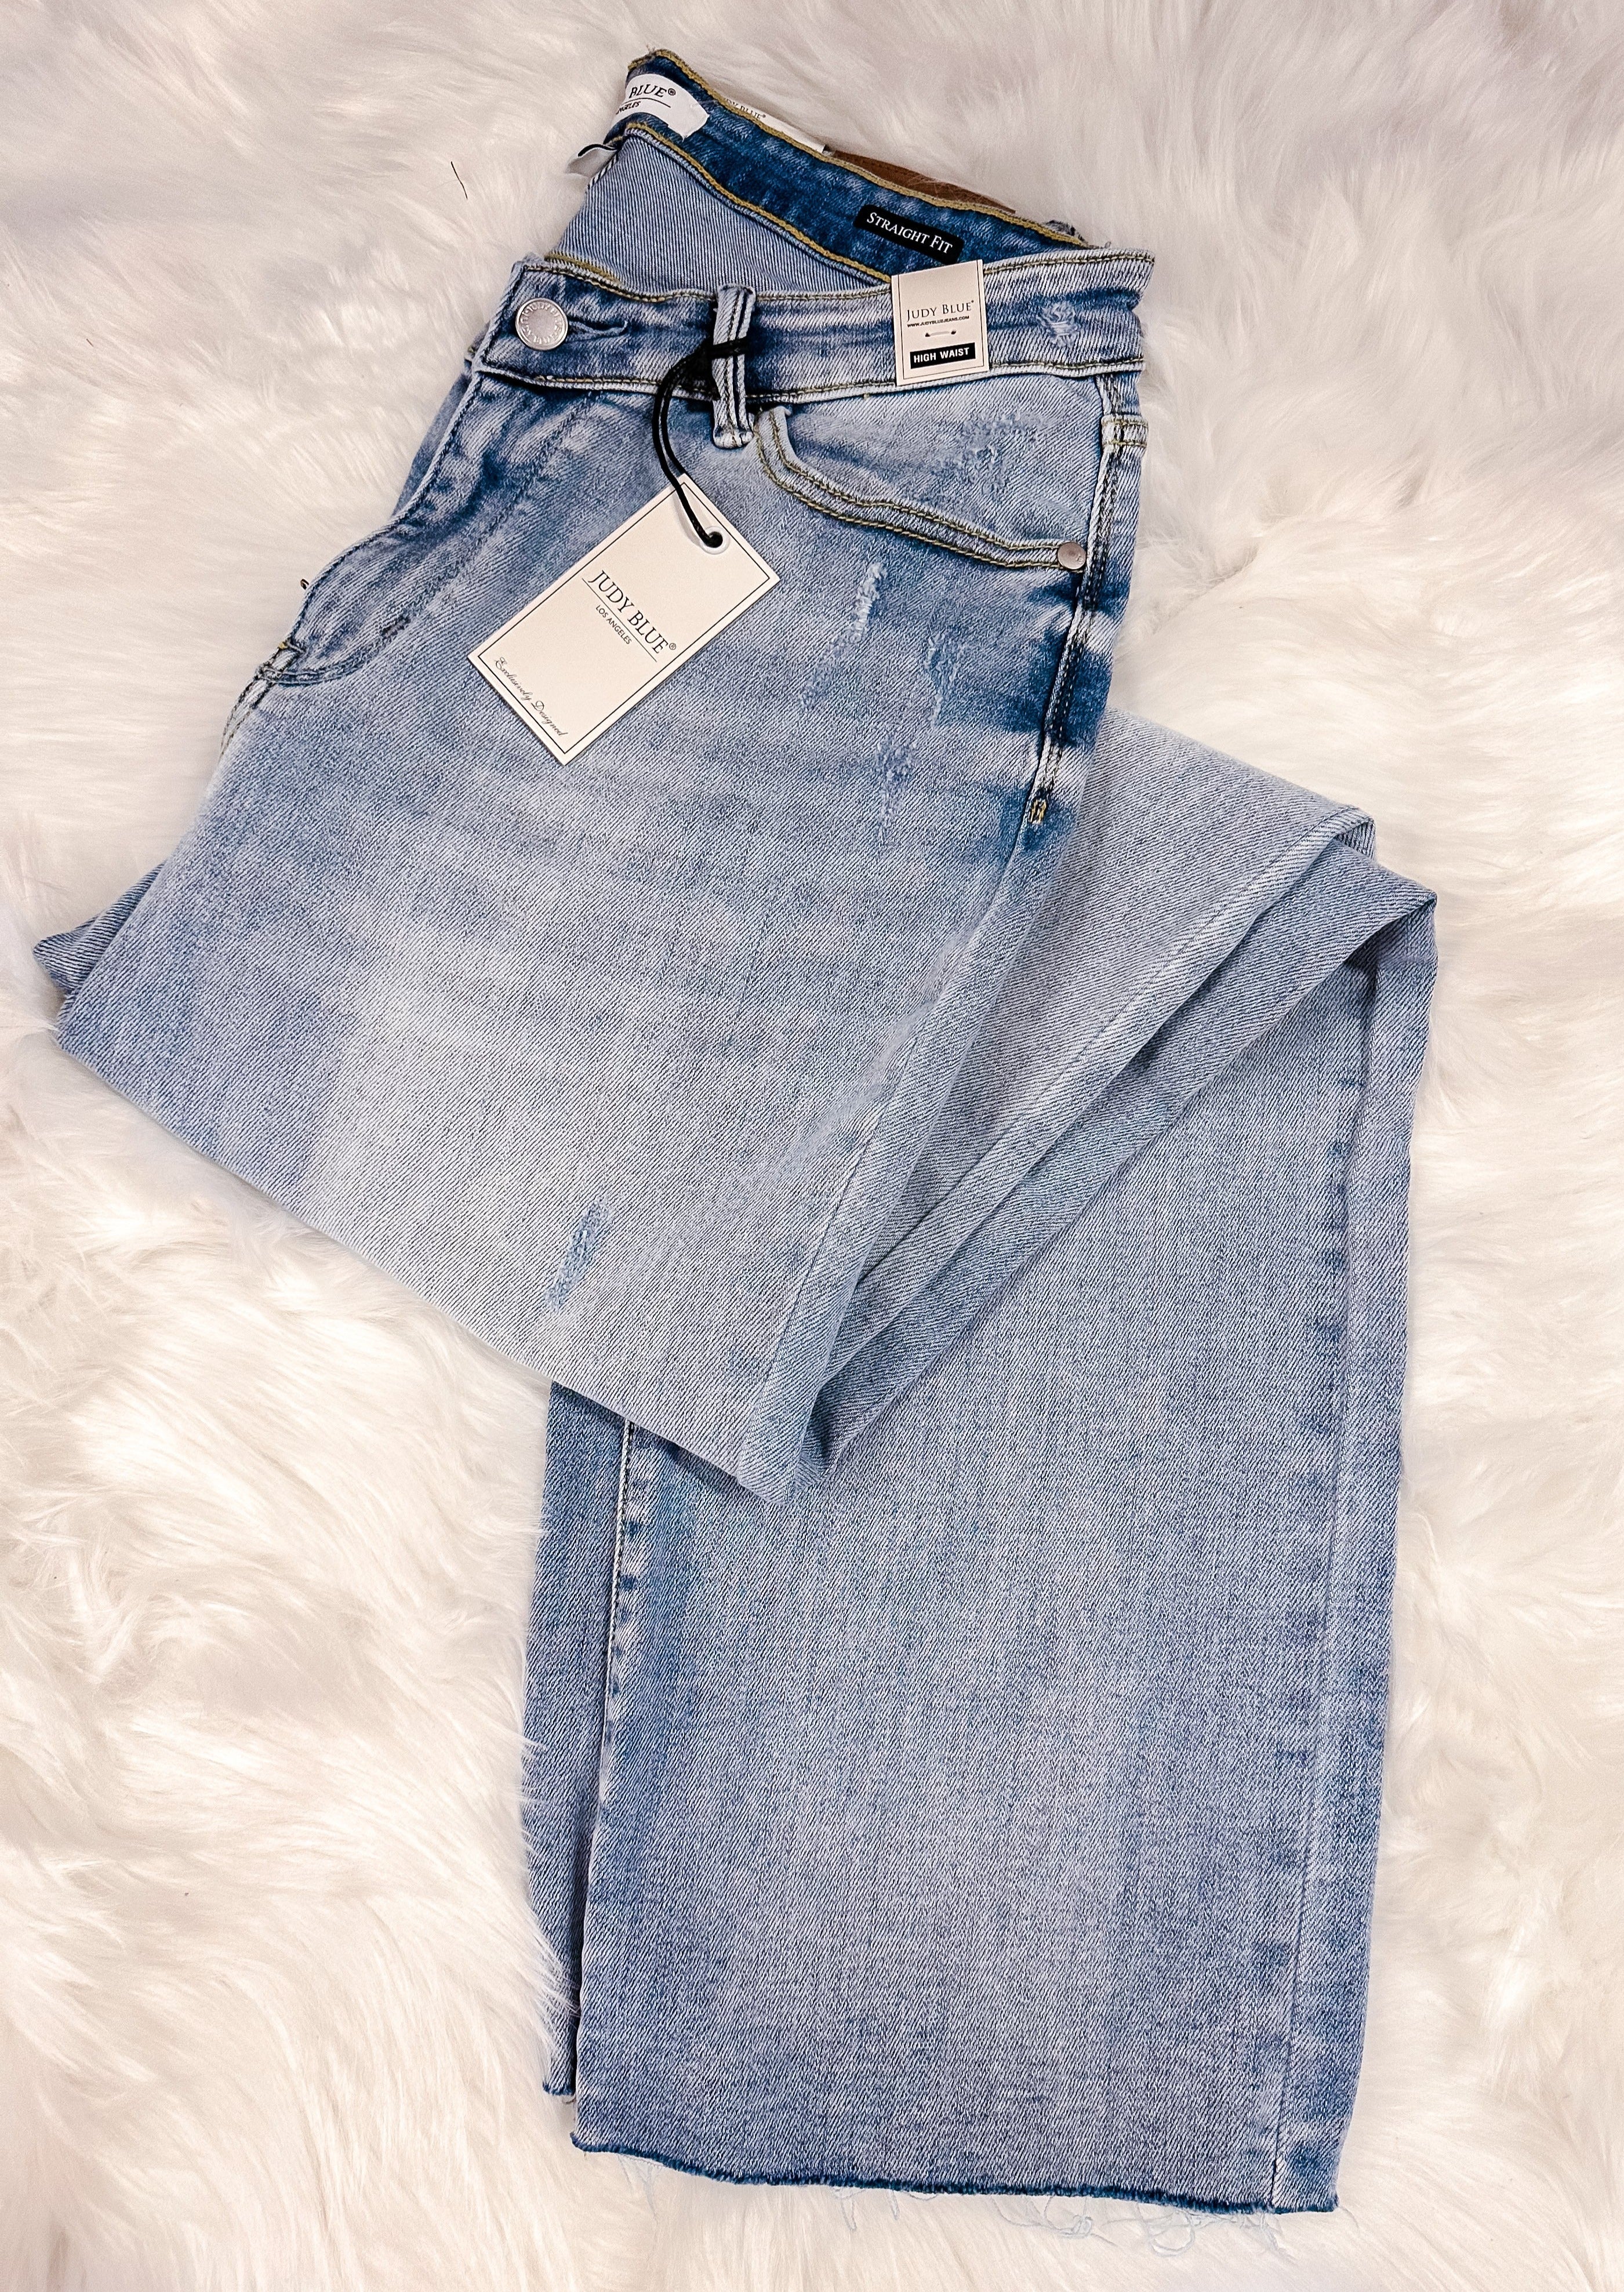 JUDY BLUE jeans with unfinished hem that can be cut to the length you want, light blue, button and zipper closure, front and back pockets, belt loops